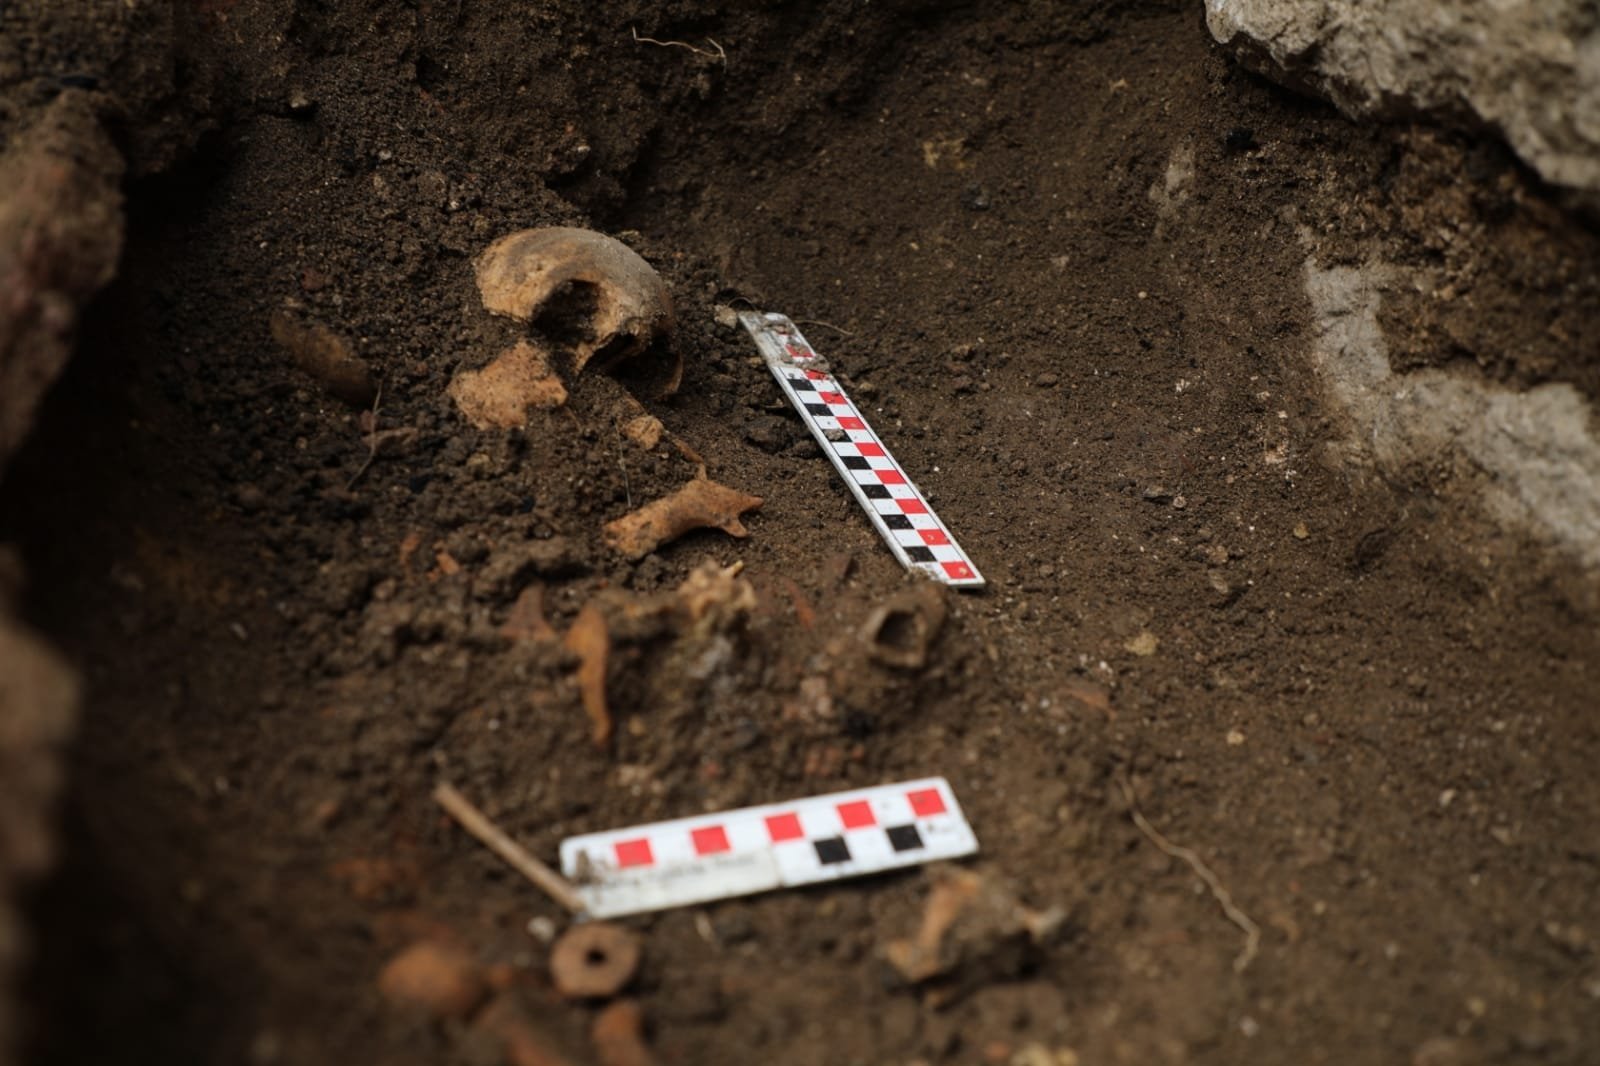 The grave of a baby found in the ancient city of Prusias ad Hypium in Düzce, northwestern Turkey, Dec. 3, 2020. (AA Photo)